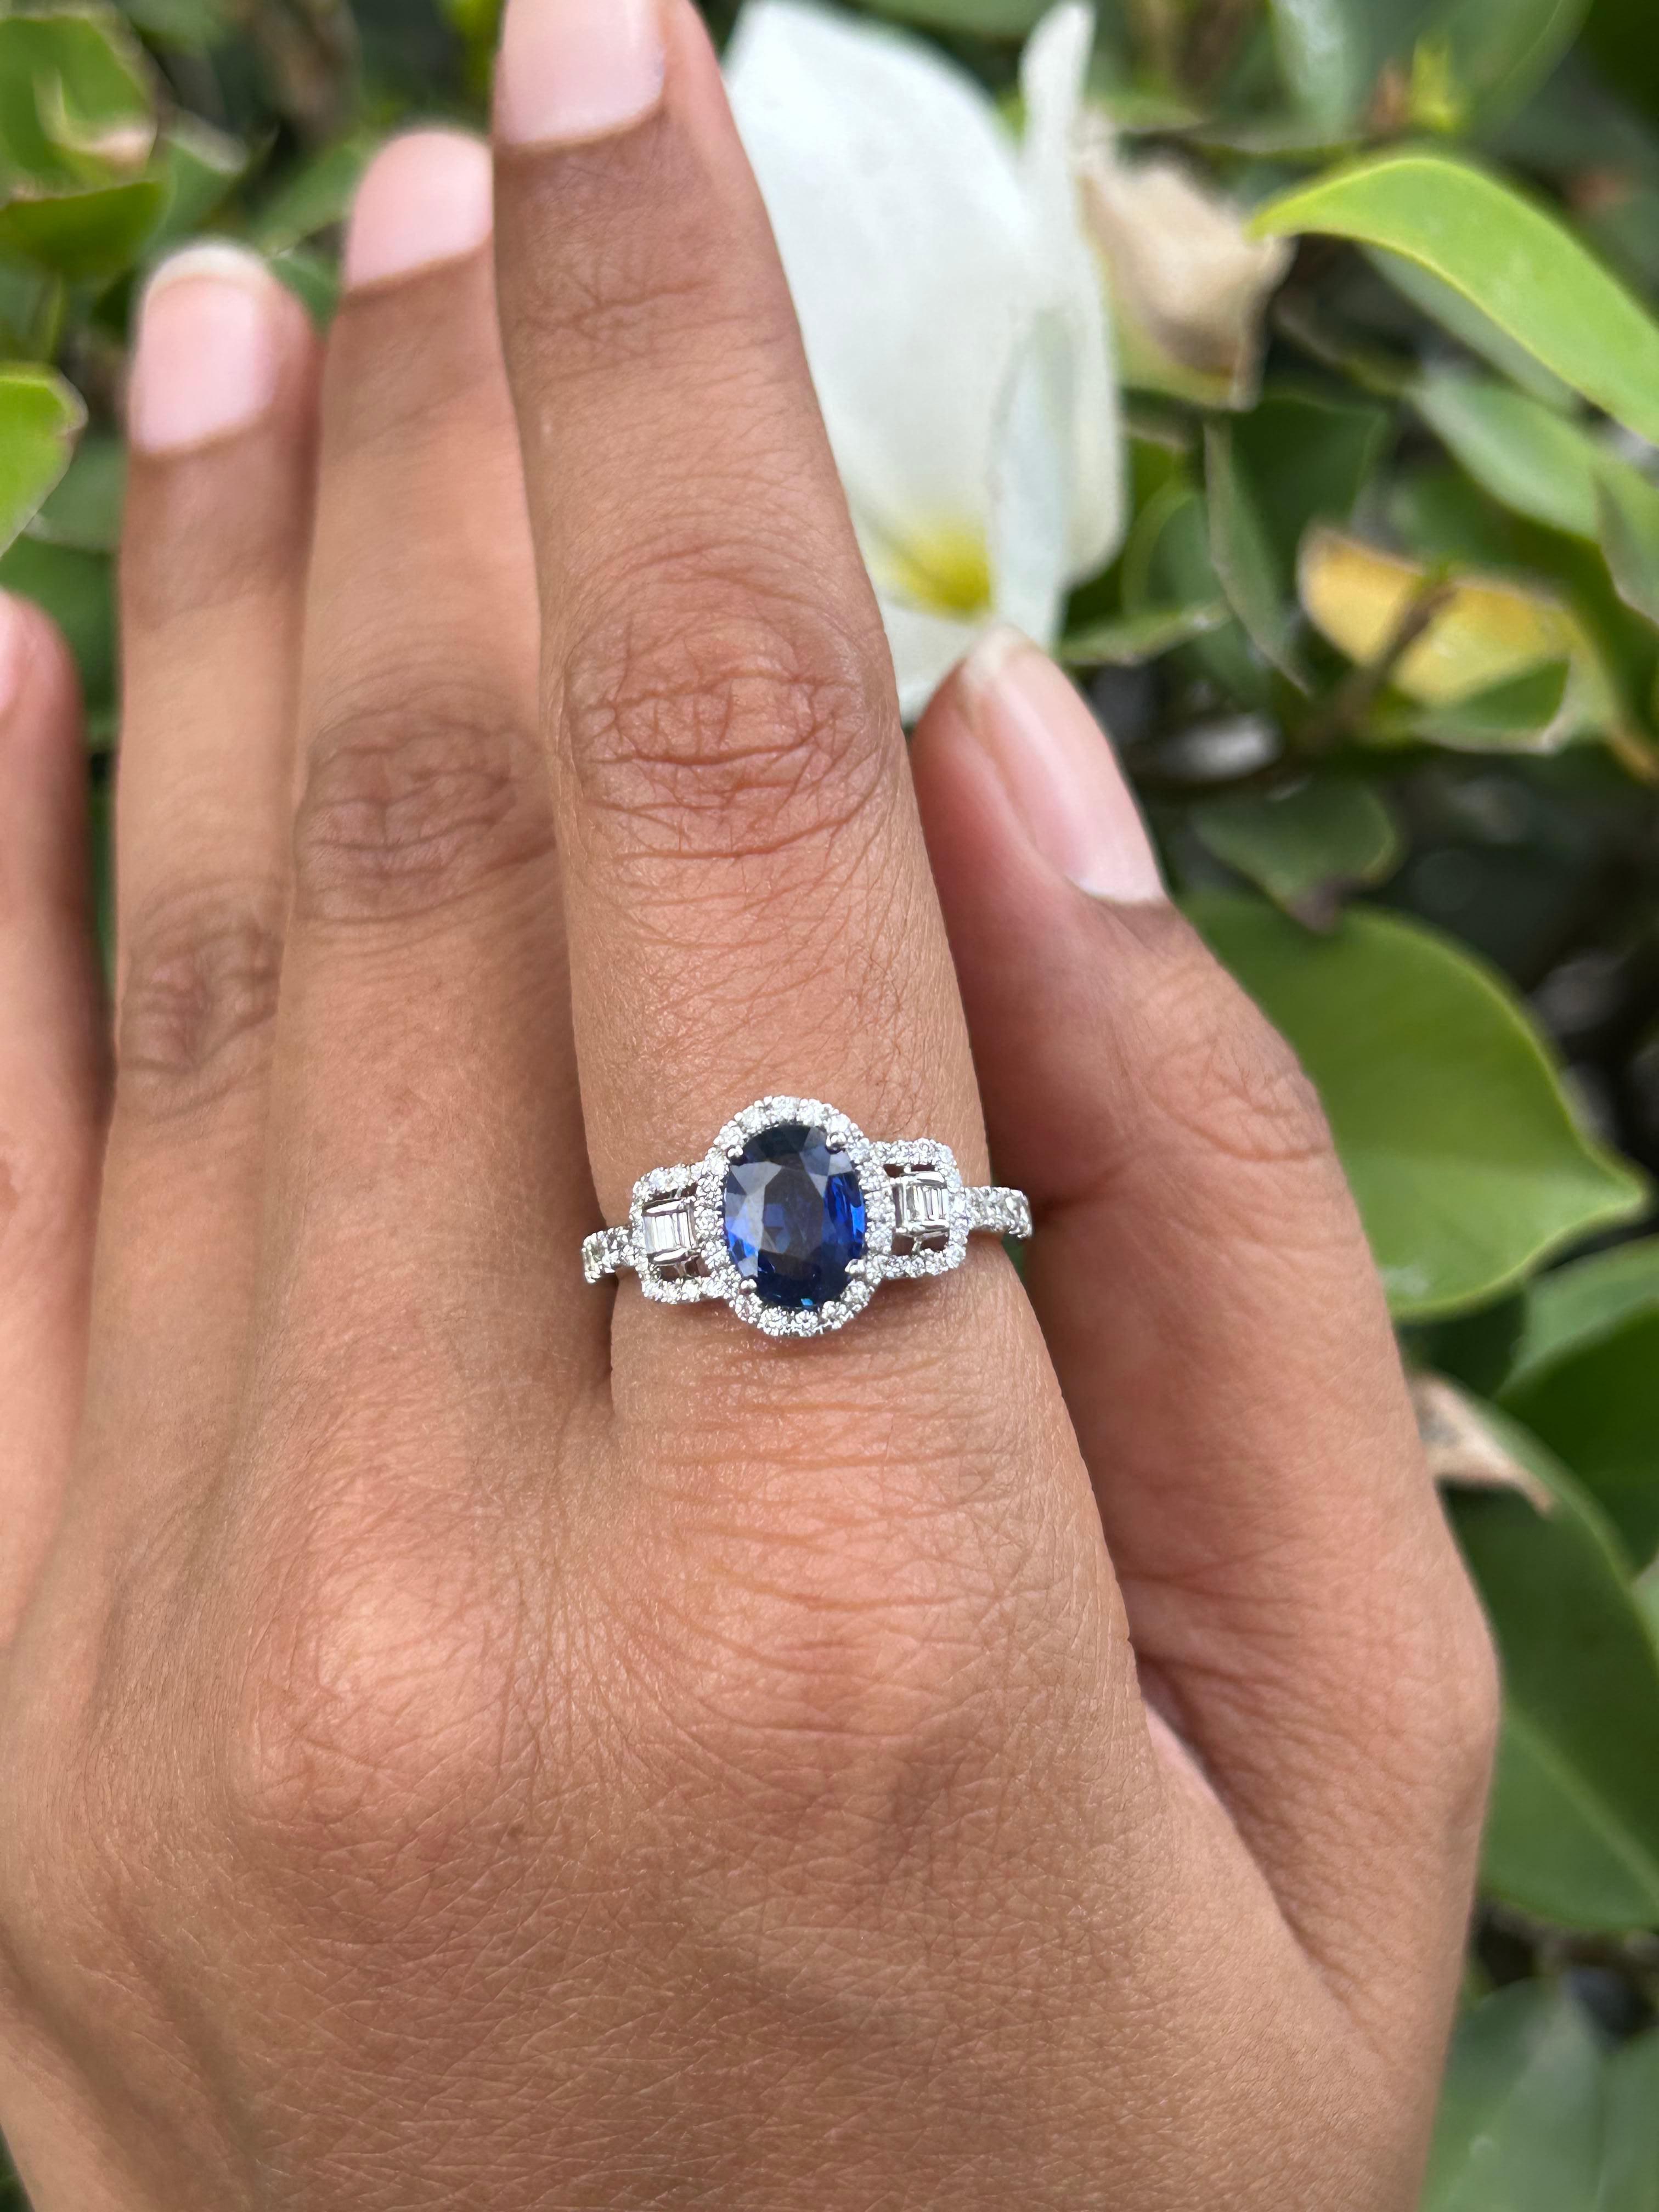 For Sale:  18k Solid White Gold Faceted Blue Sapphire Diamond Engagement Ring Certified 4